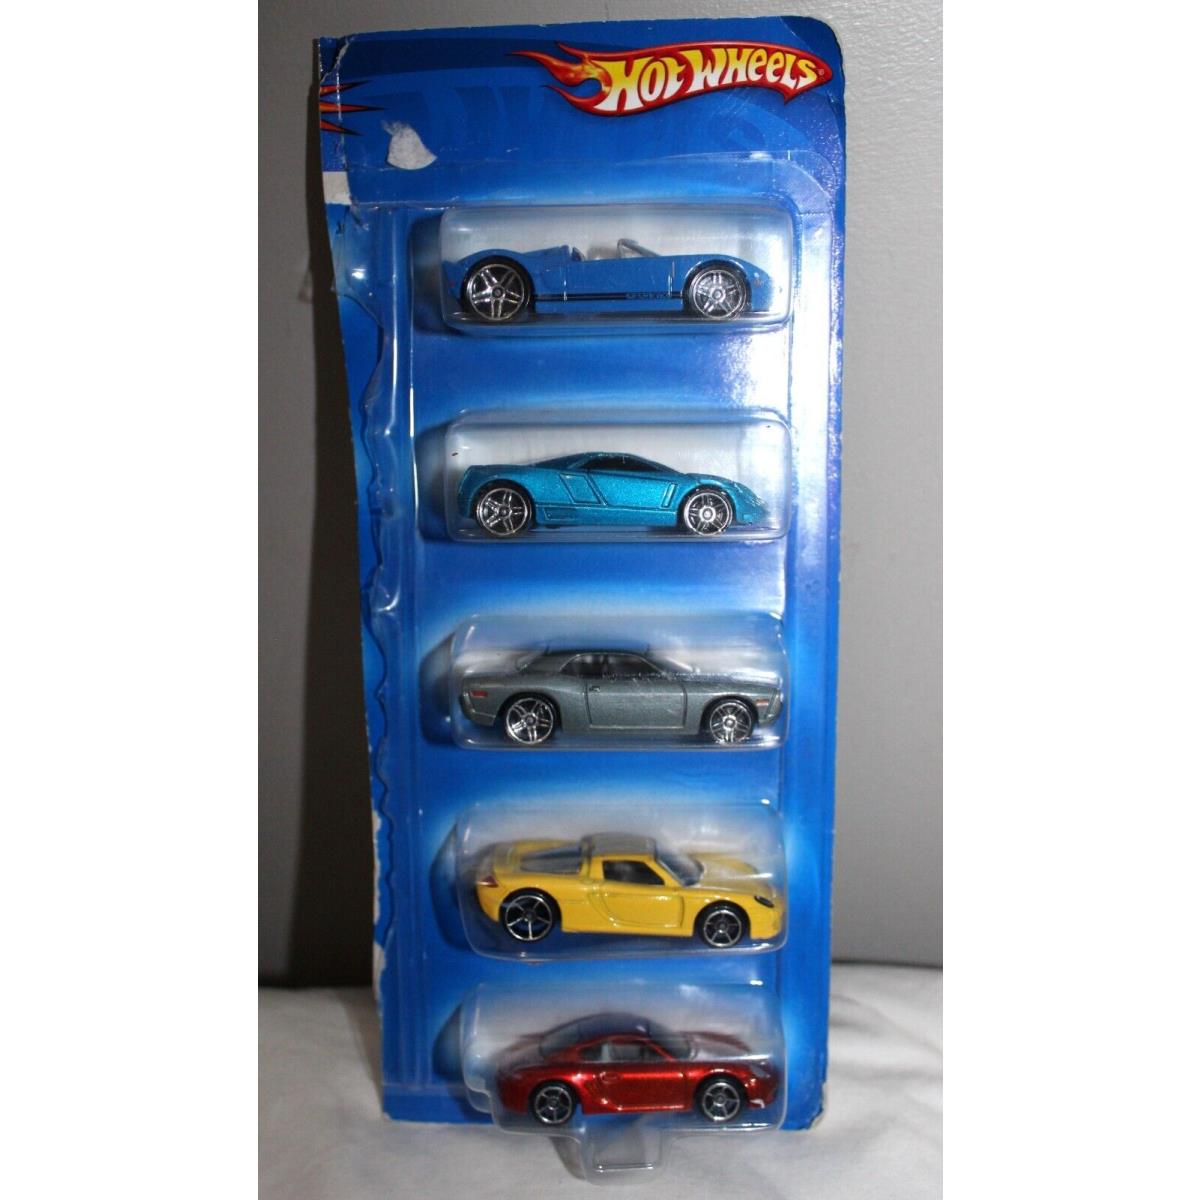 Hot Wheels Flaw 5 Pack Diecast Cars Malaysia 2007 Various Models Diecast